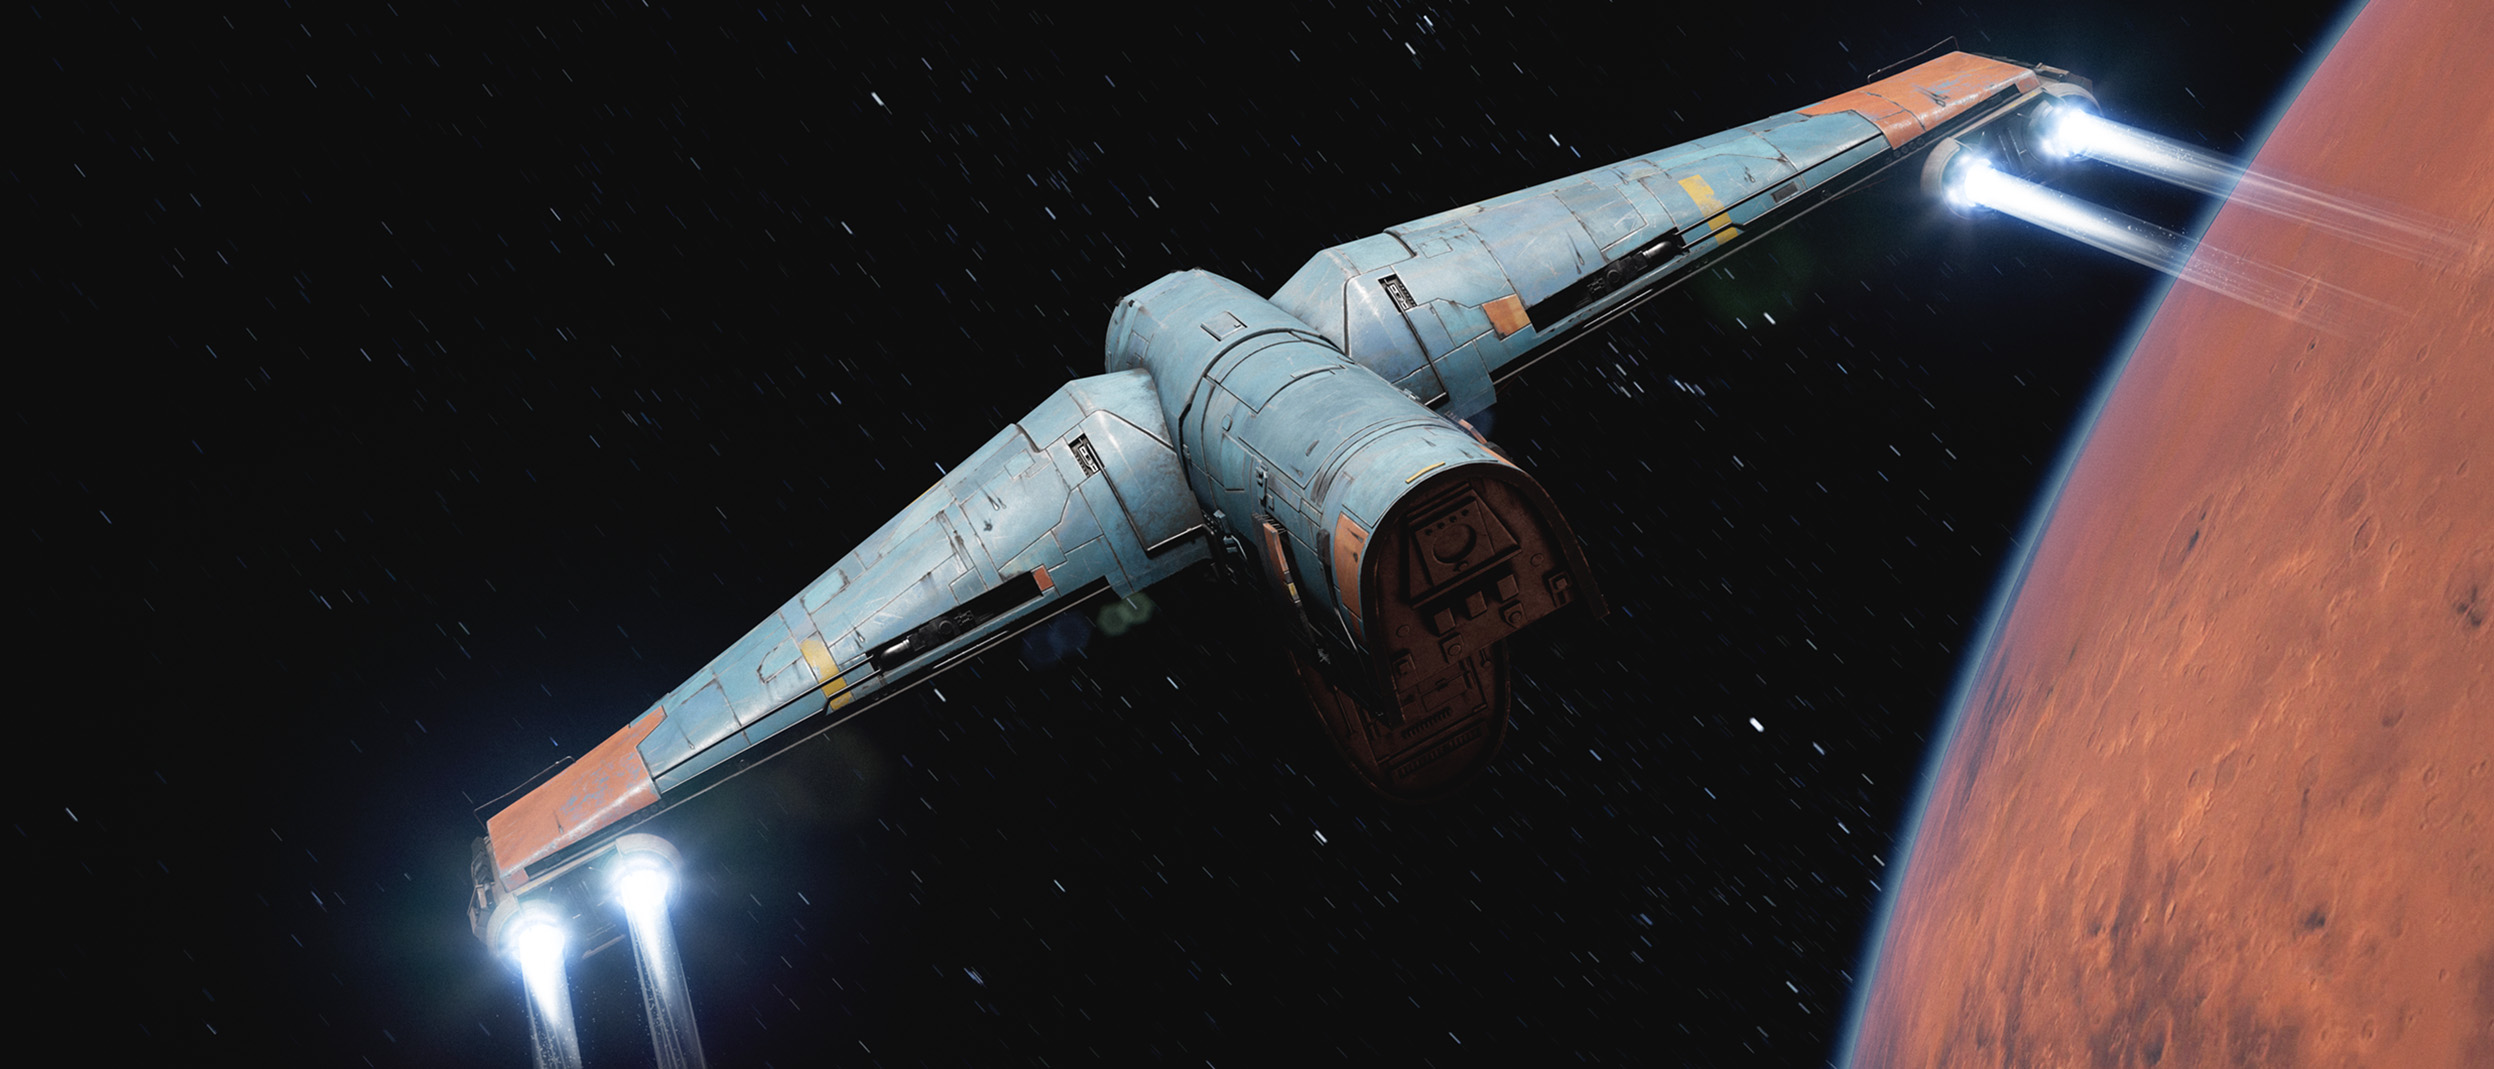 An image of a gunship Inspired by Angelos Karderinis' renders with a Star Wars aesthetic and dynamic, nostalgic feel.